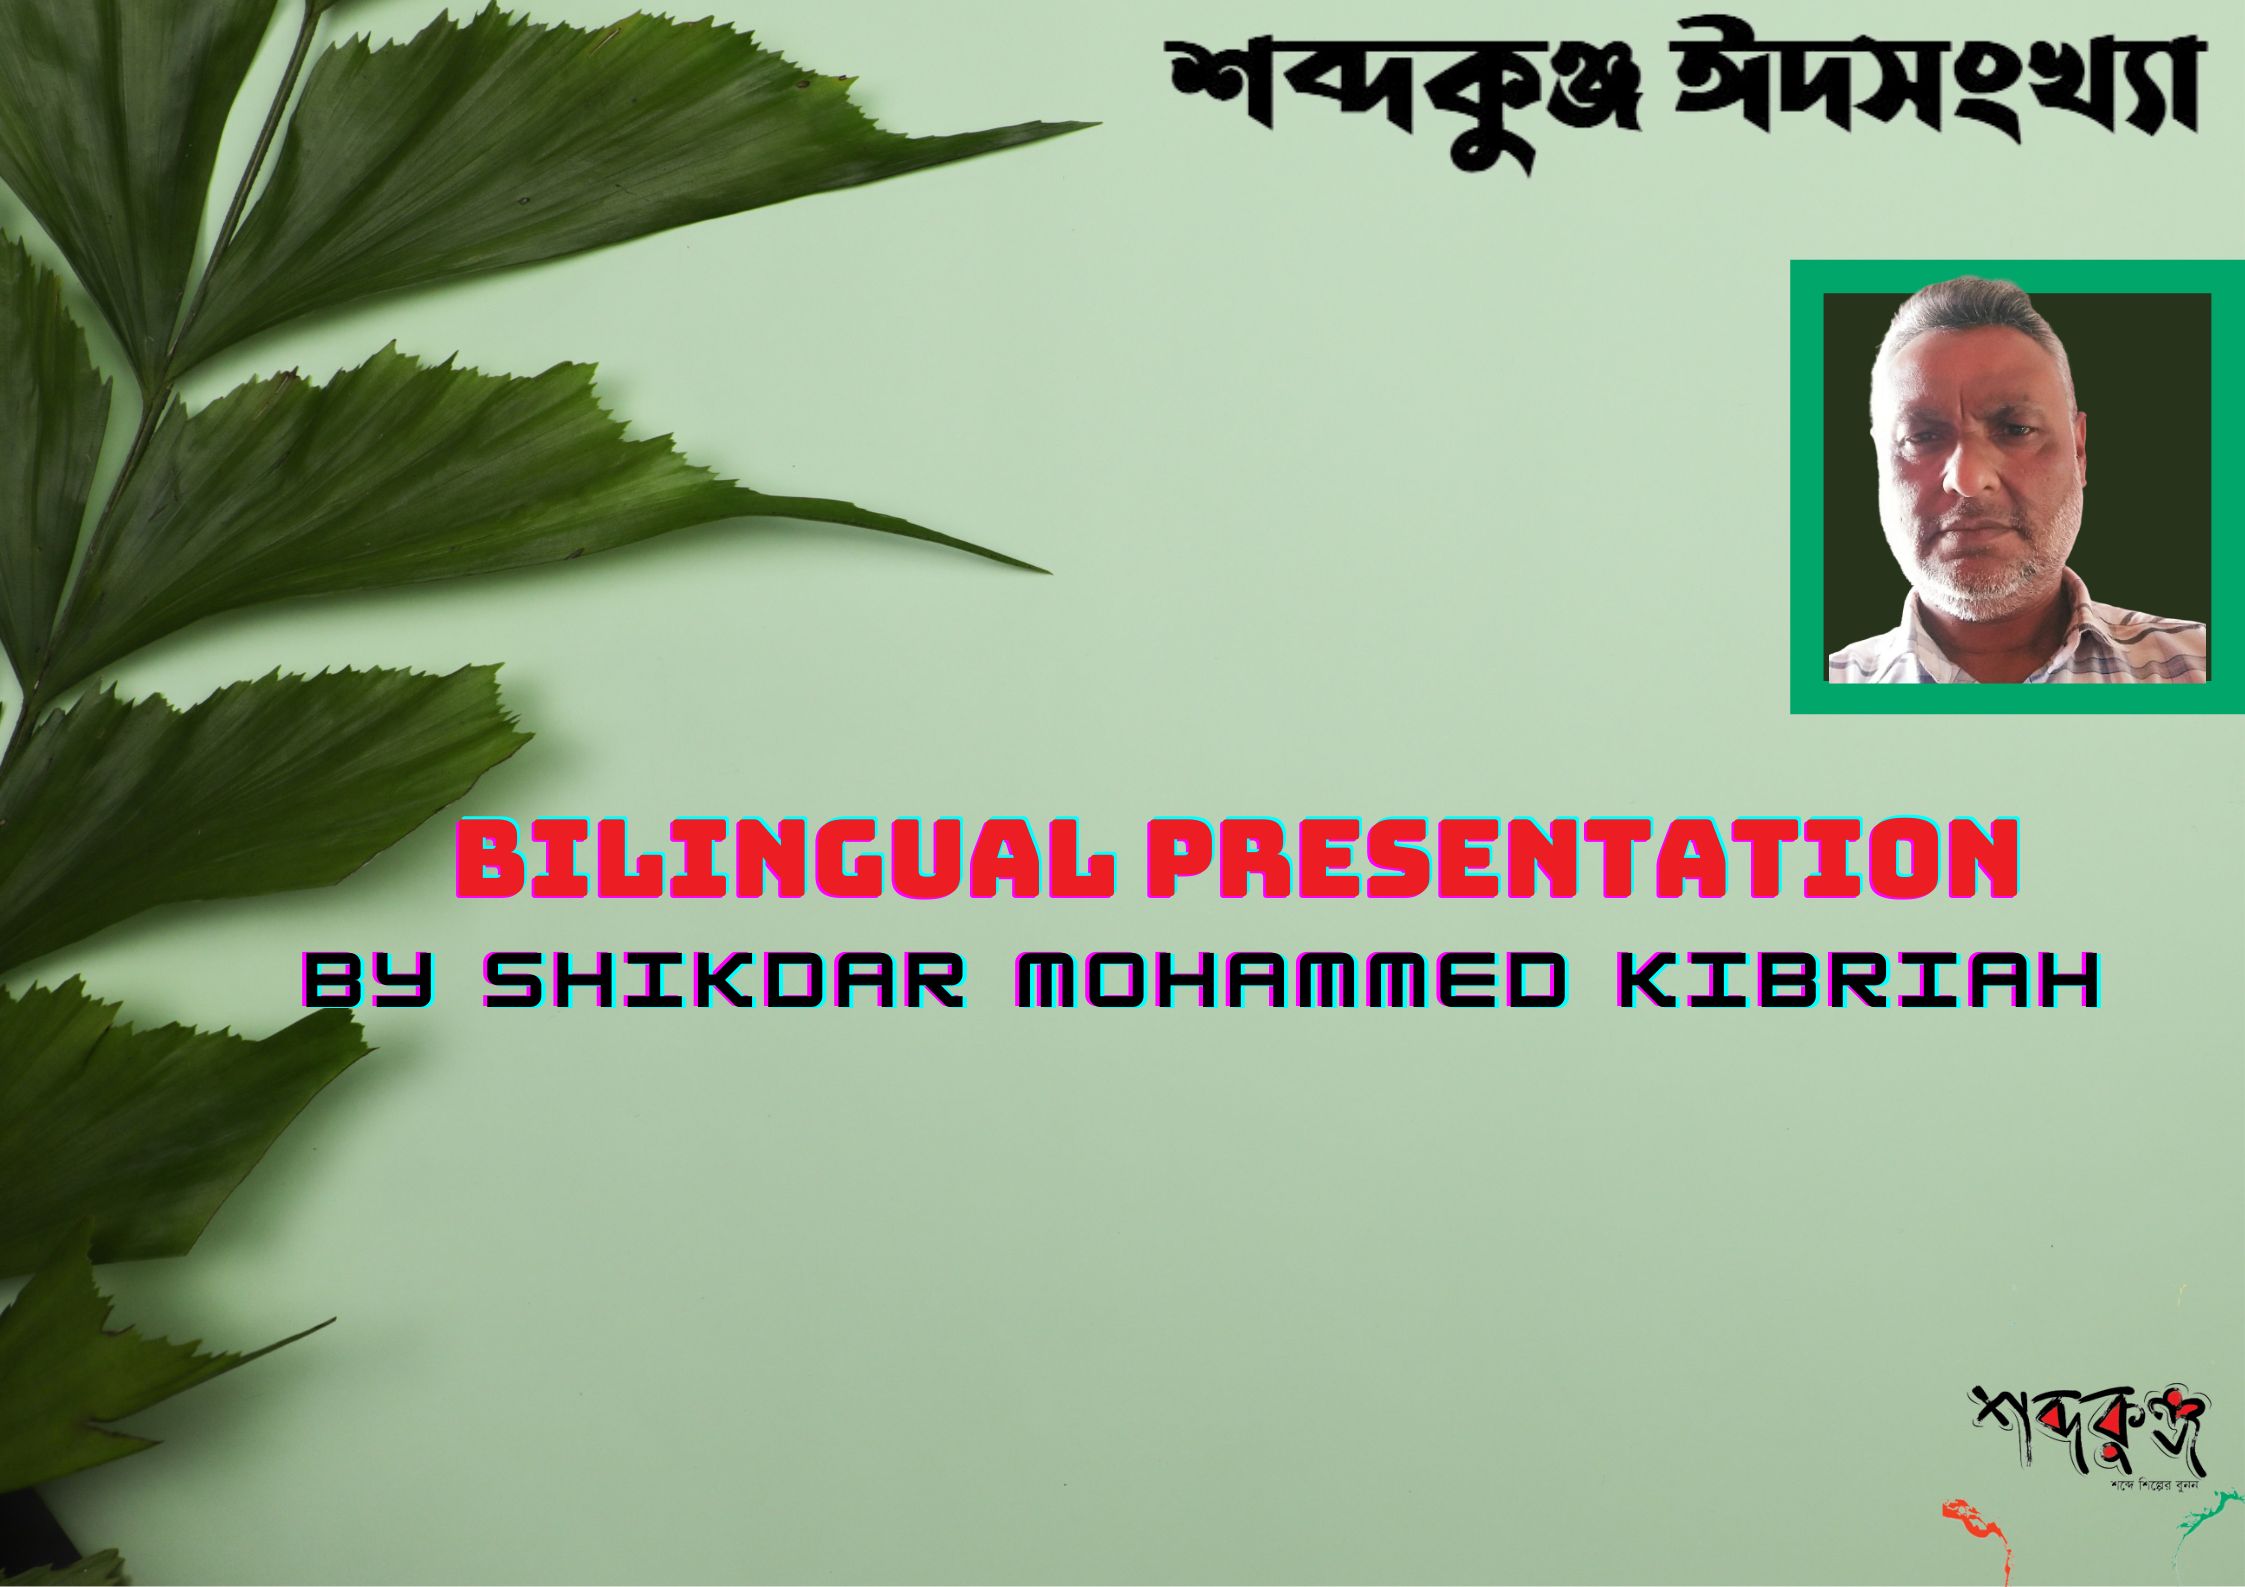 You are currently viewing SHABDAKUNJA EID ISSUE: BILINGUAL PRESENTATION BY SHIKDER MOHAMMED KIBRIAH